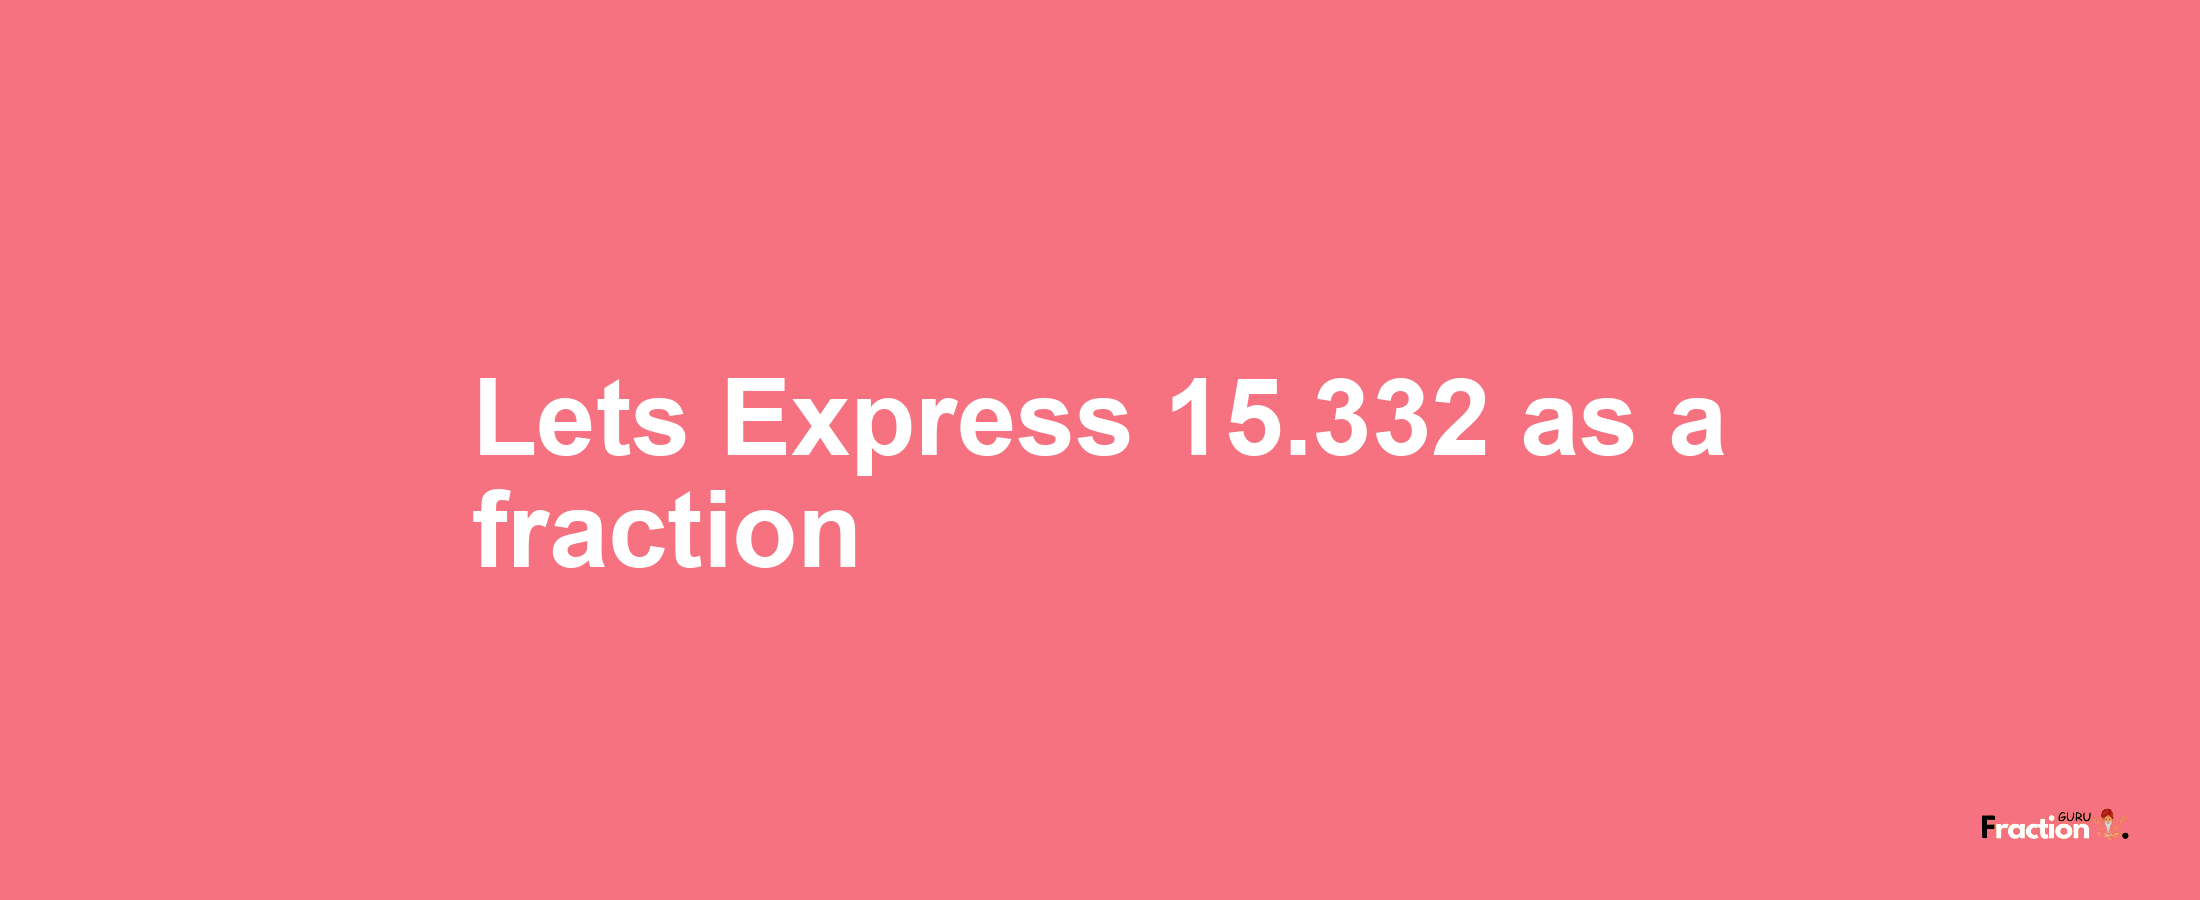 Lets Express 15.332 as afraction